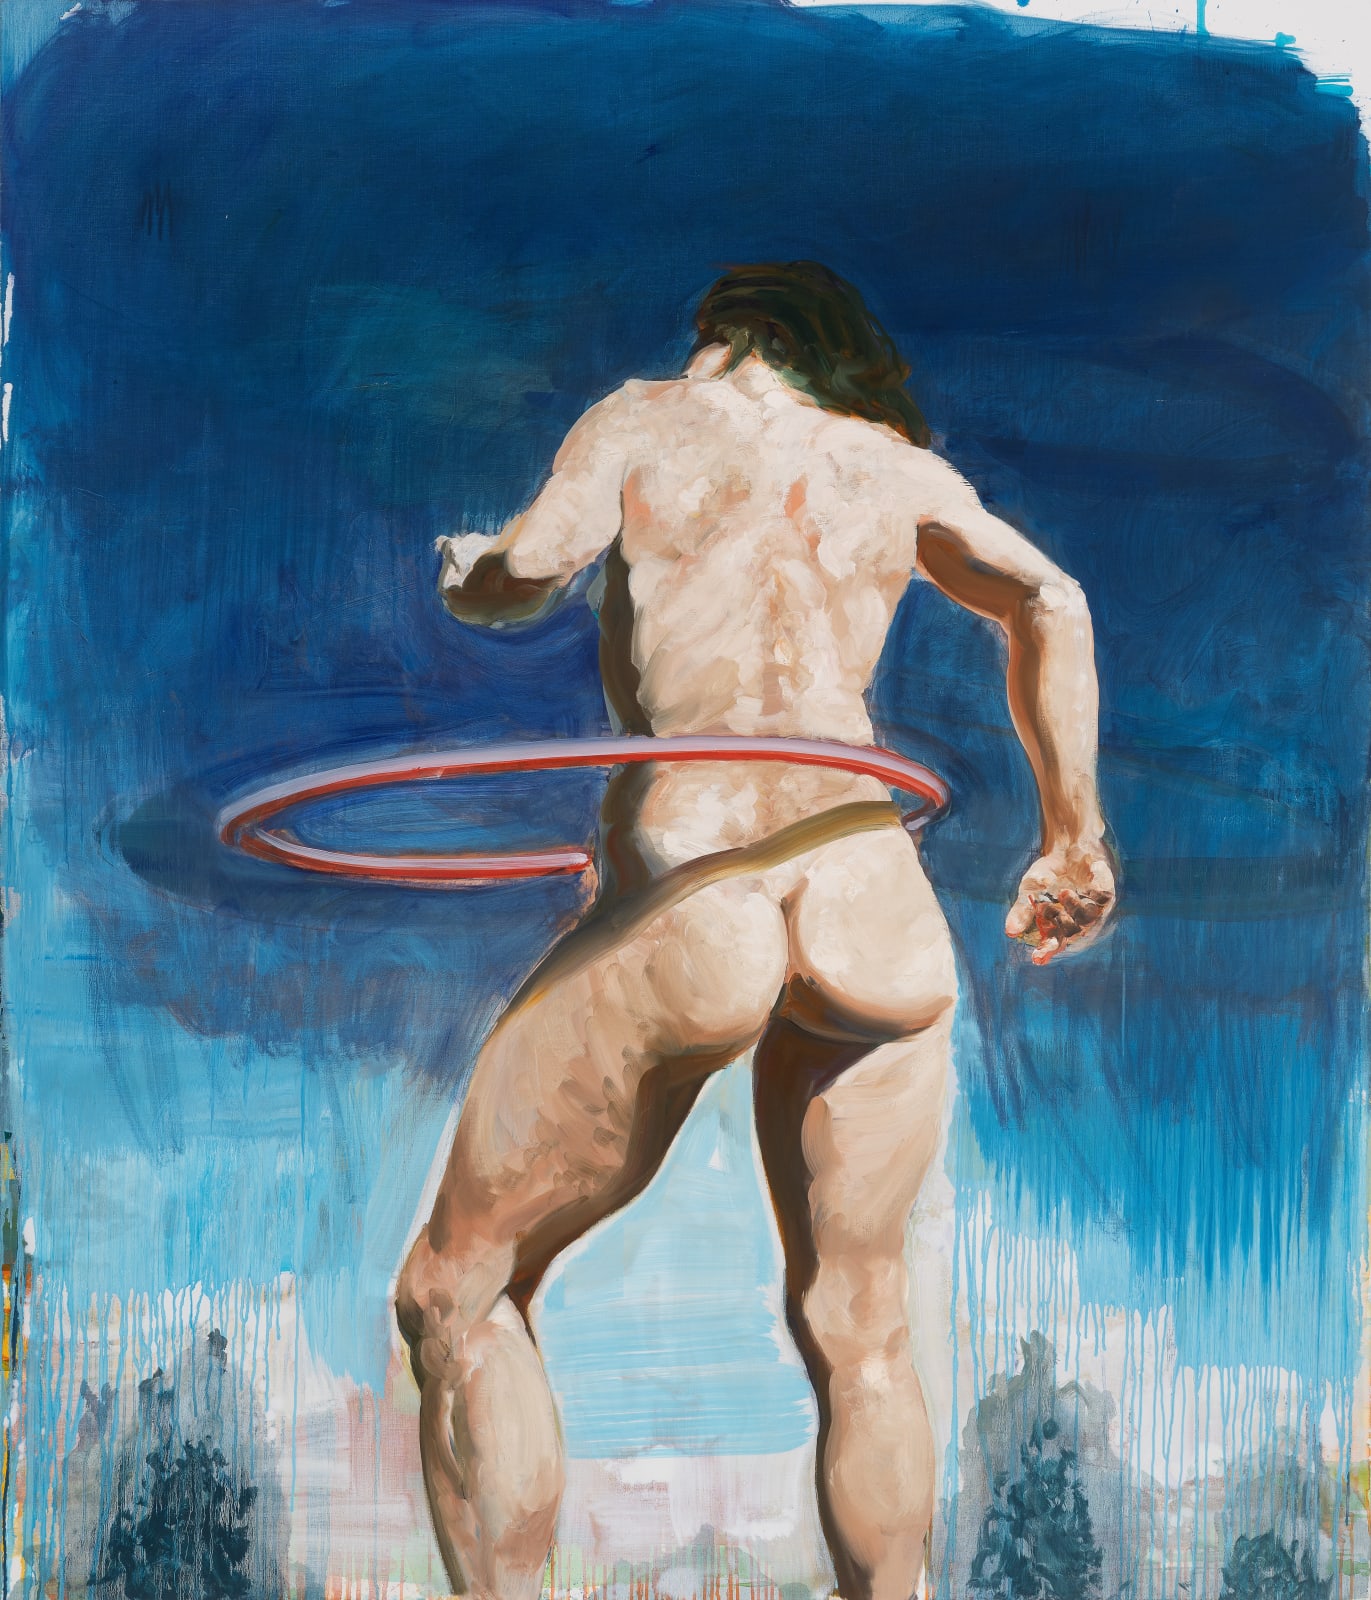 Eric Fischl American Hula 2020 acrylic and oil on canvas 75 x 64 inches 190.5 x 162.6 cm